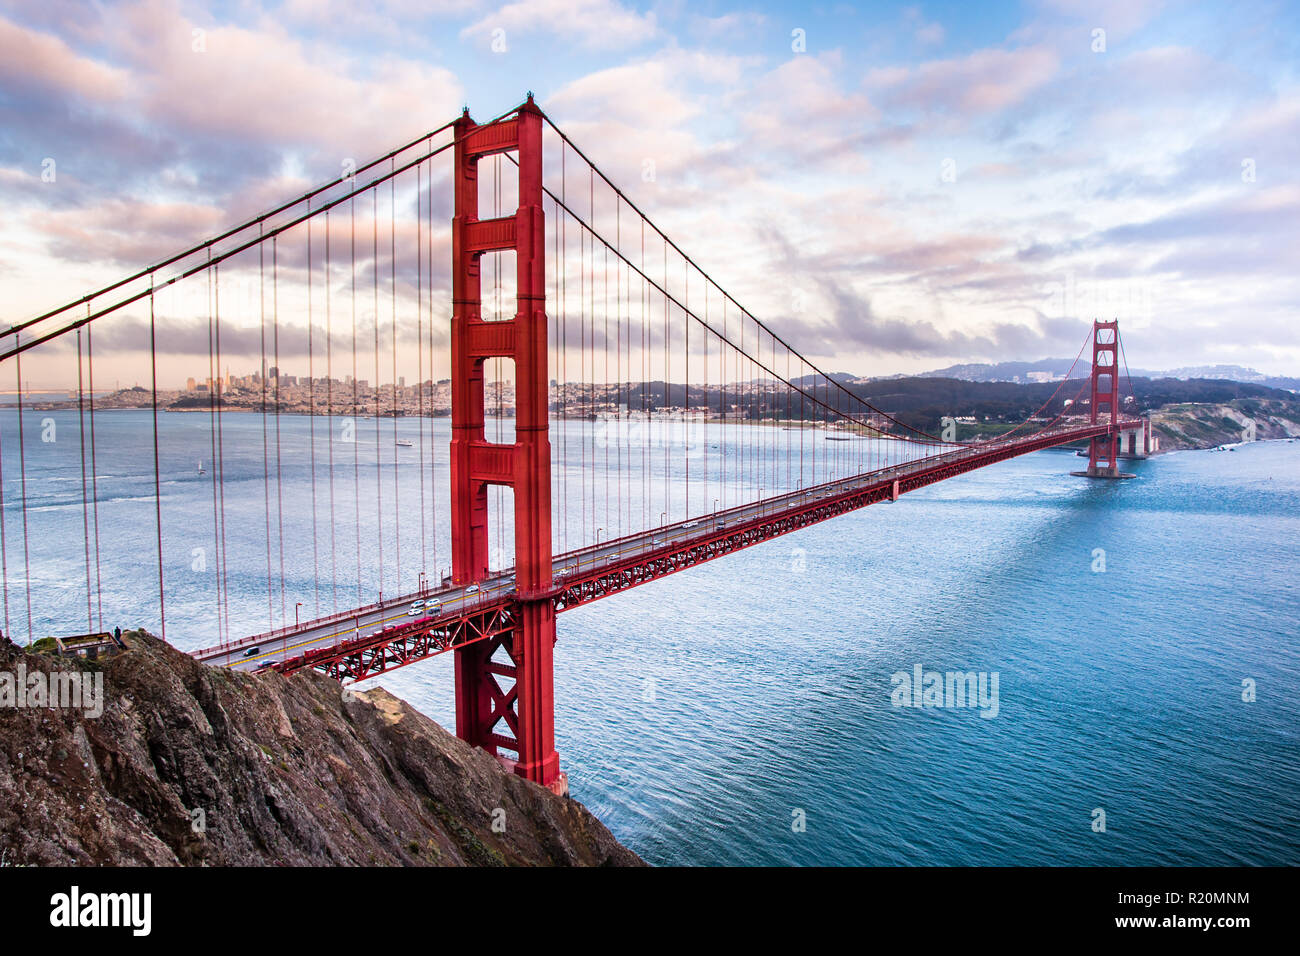 Panoramic view of Golden Gate Bridge connecting San Francisco and Marin Headlands, at sunset Stock Photo